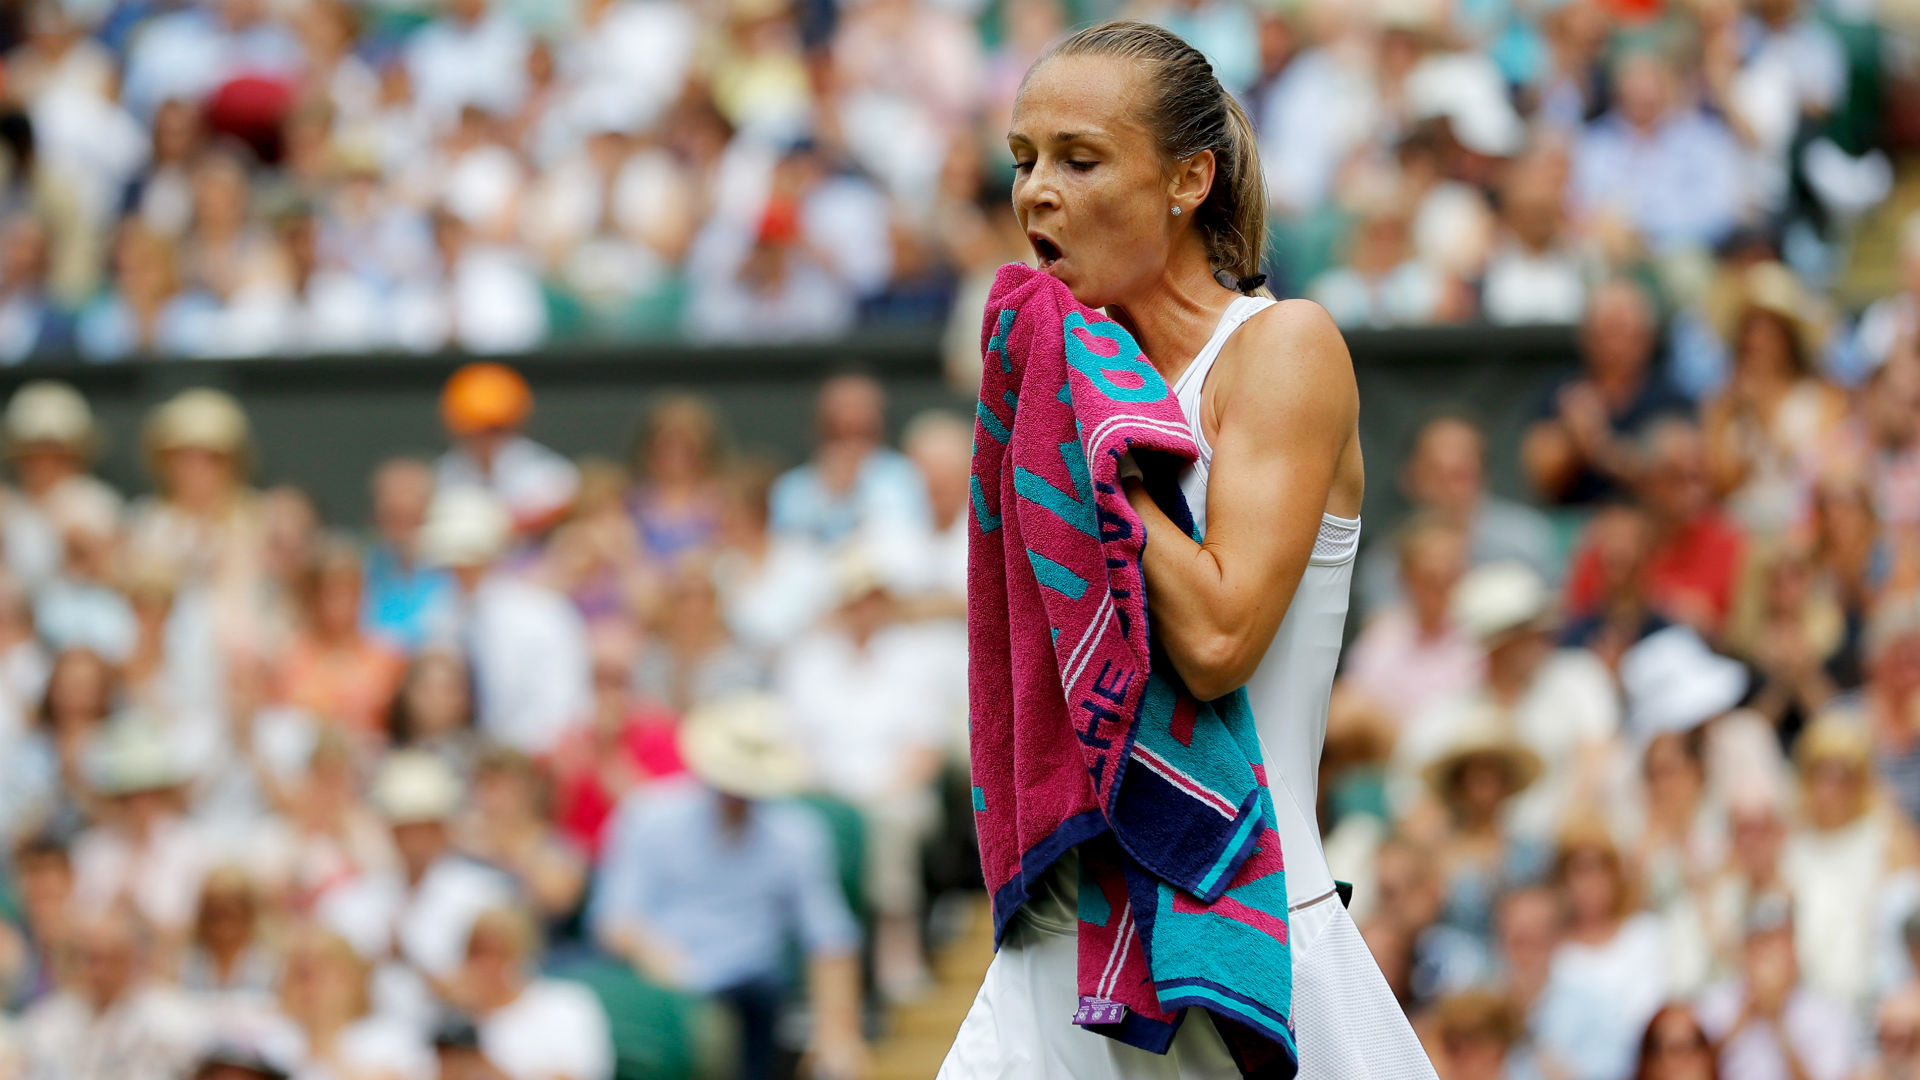 There were contrasting fortunes for seeds Magdalena Rybarikova and Anastasia Pavlyuchenkova at the Linz Open on Monday.